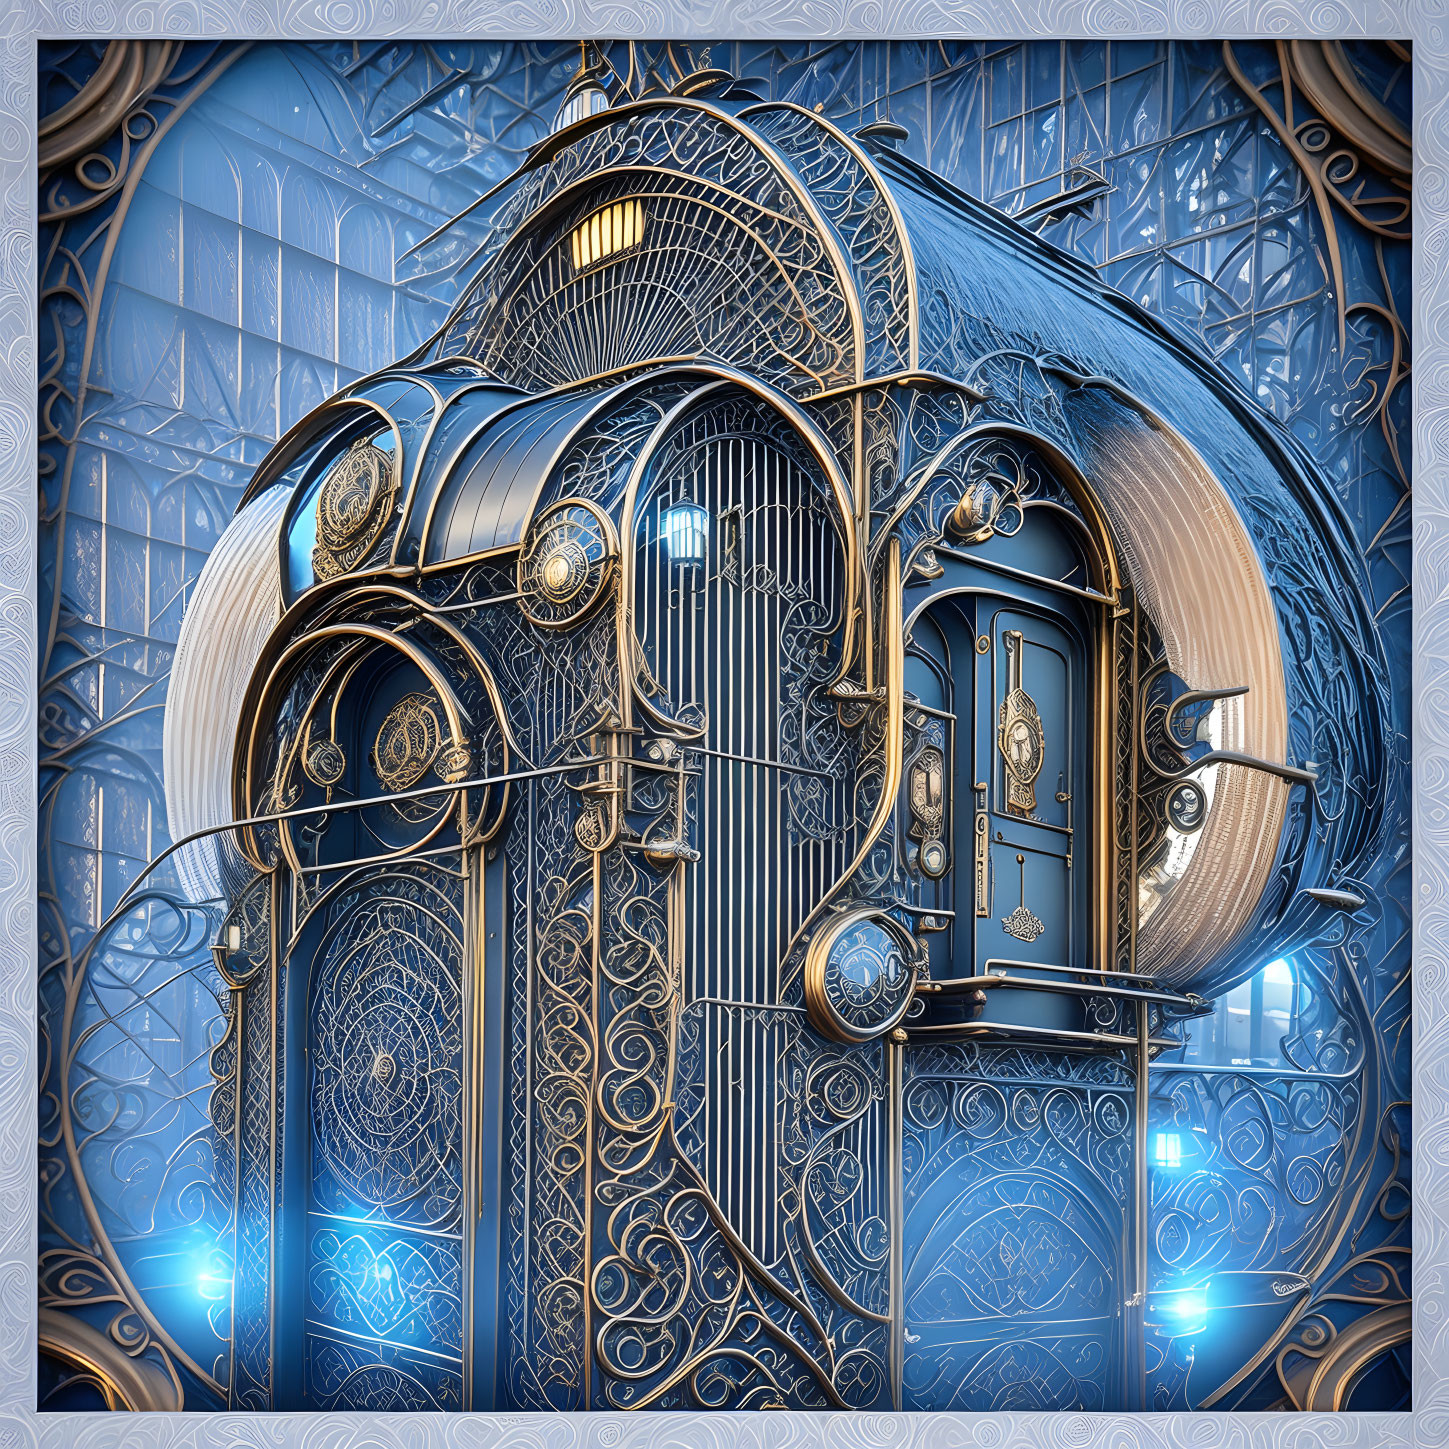 Intricate Steampunk-Style Door with Glowing Blue Lights